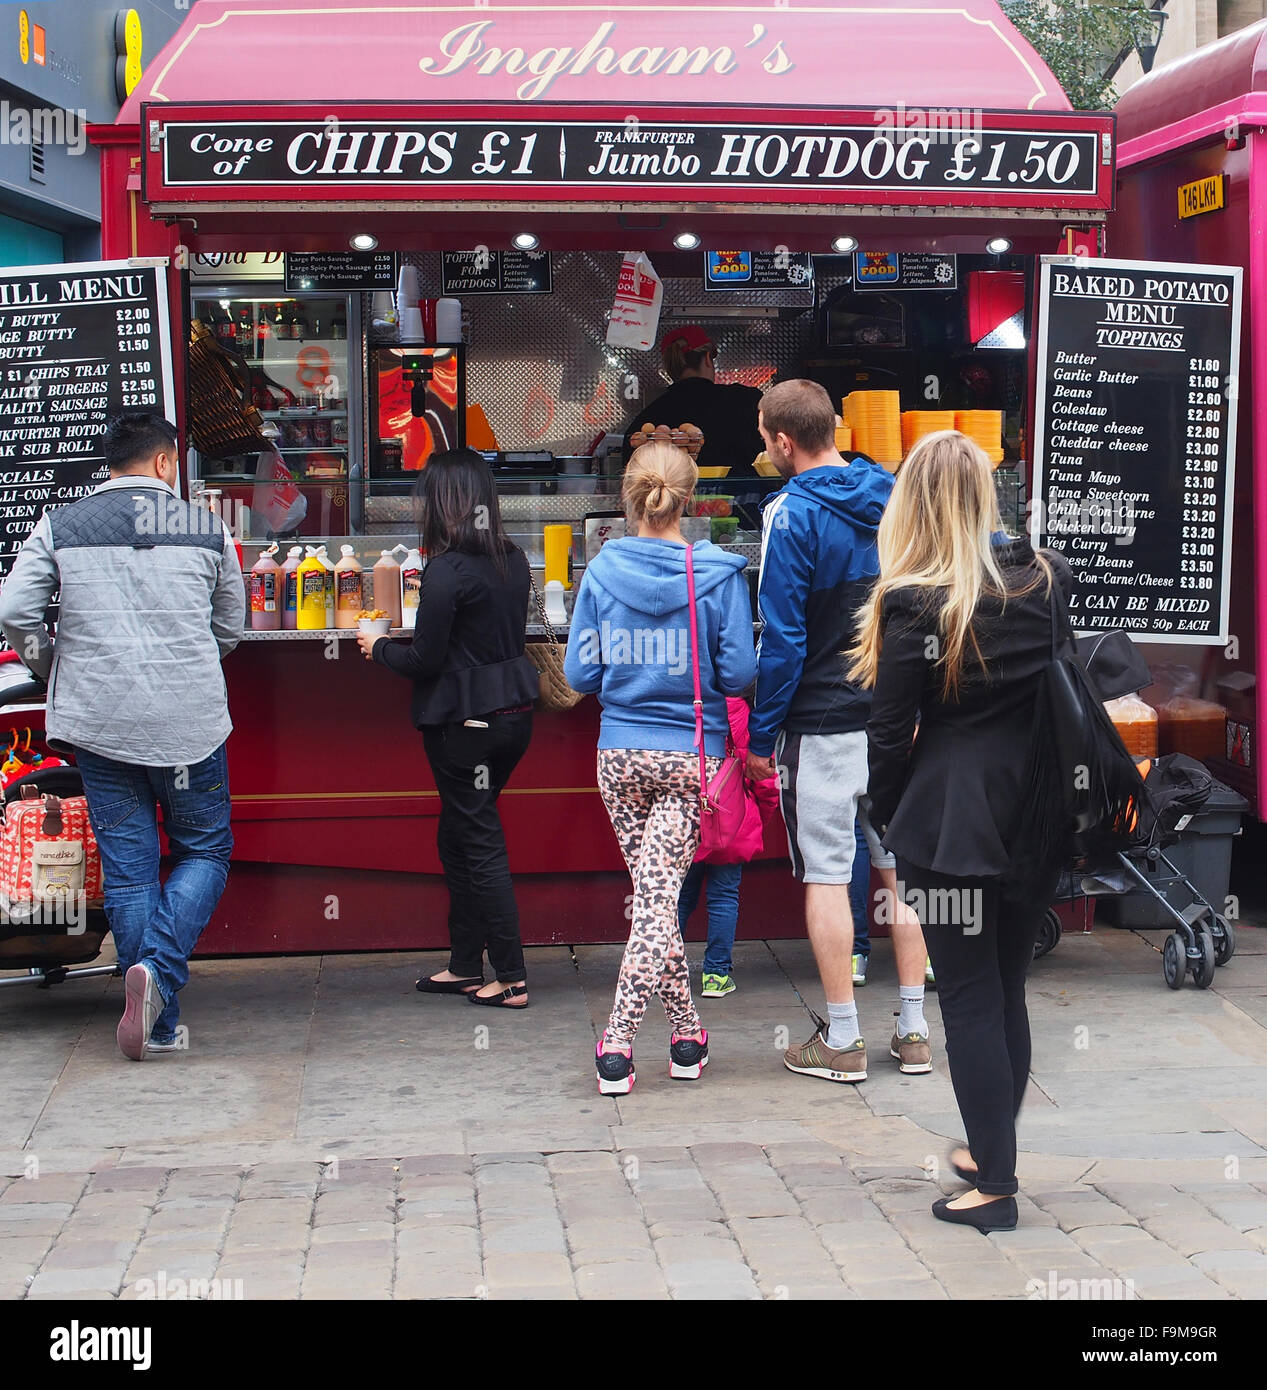 Manchester city centre food concession kiosks serving fast food - burgers, chips hotdogs drinks etc opposite the Arndale Centre. Stock Photo